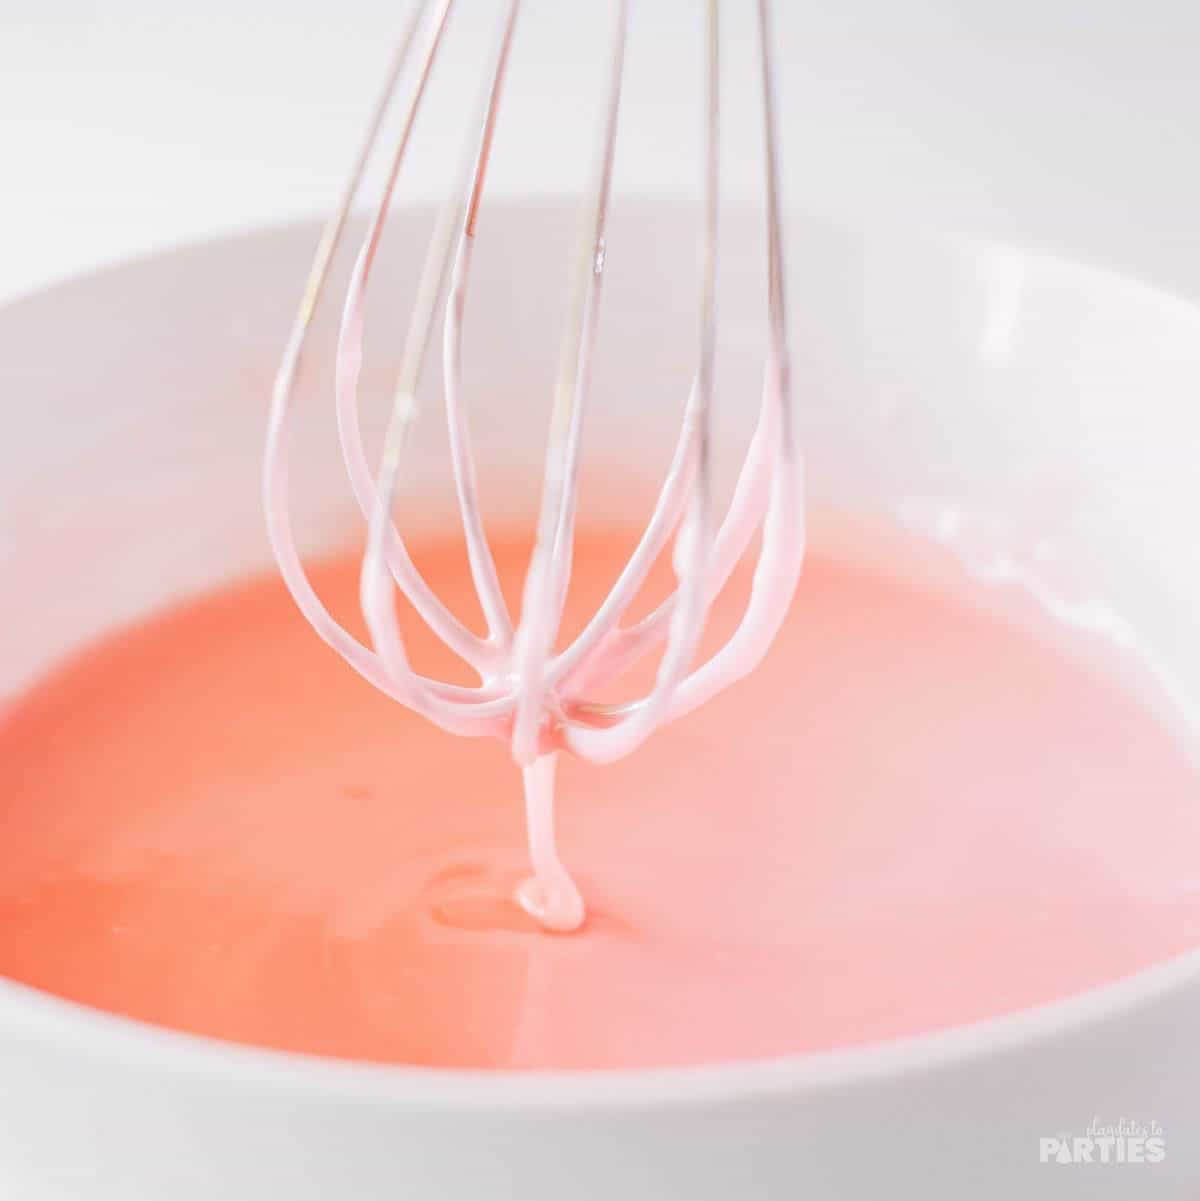 Mixing up the pink strawberry glaze.